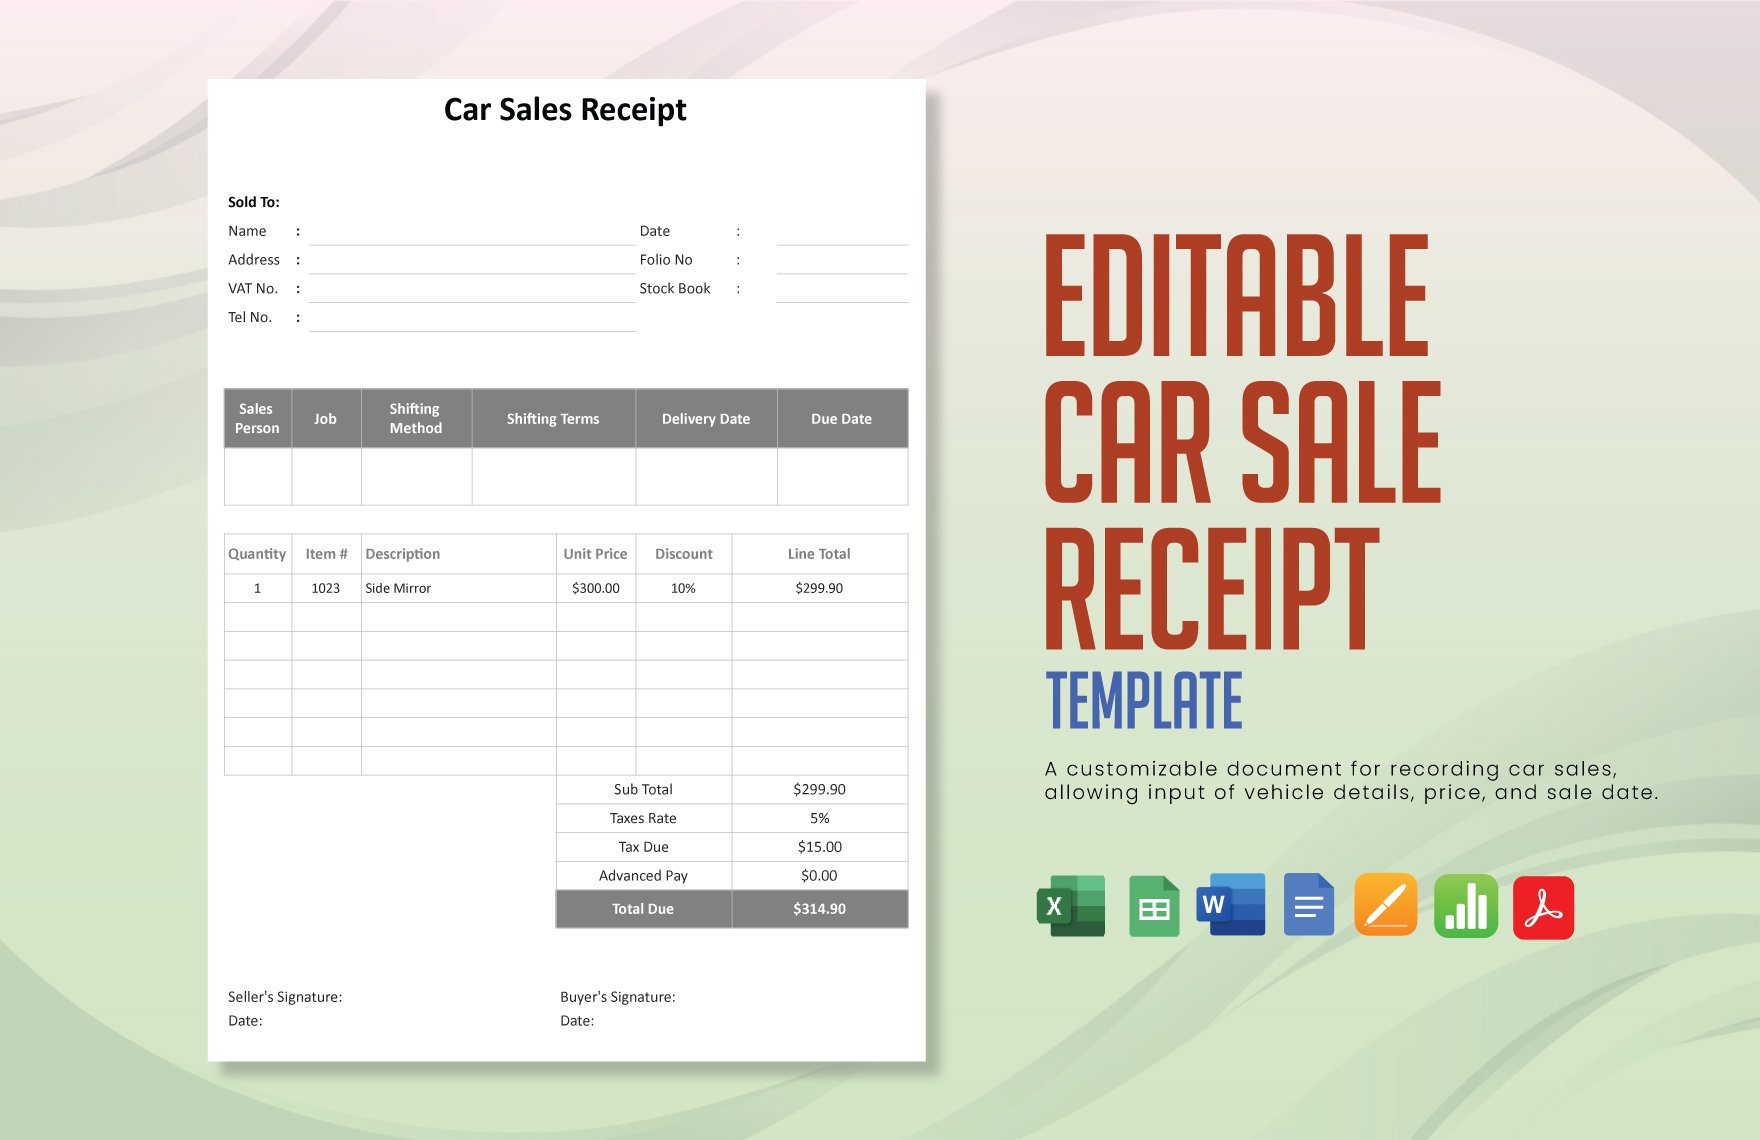 Editable Car Sale Receipt Template in Word, Google Docs, Excel, PDF, Google Sheets, Apple Pages, Apple Numbers